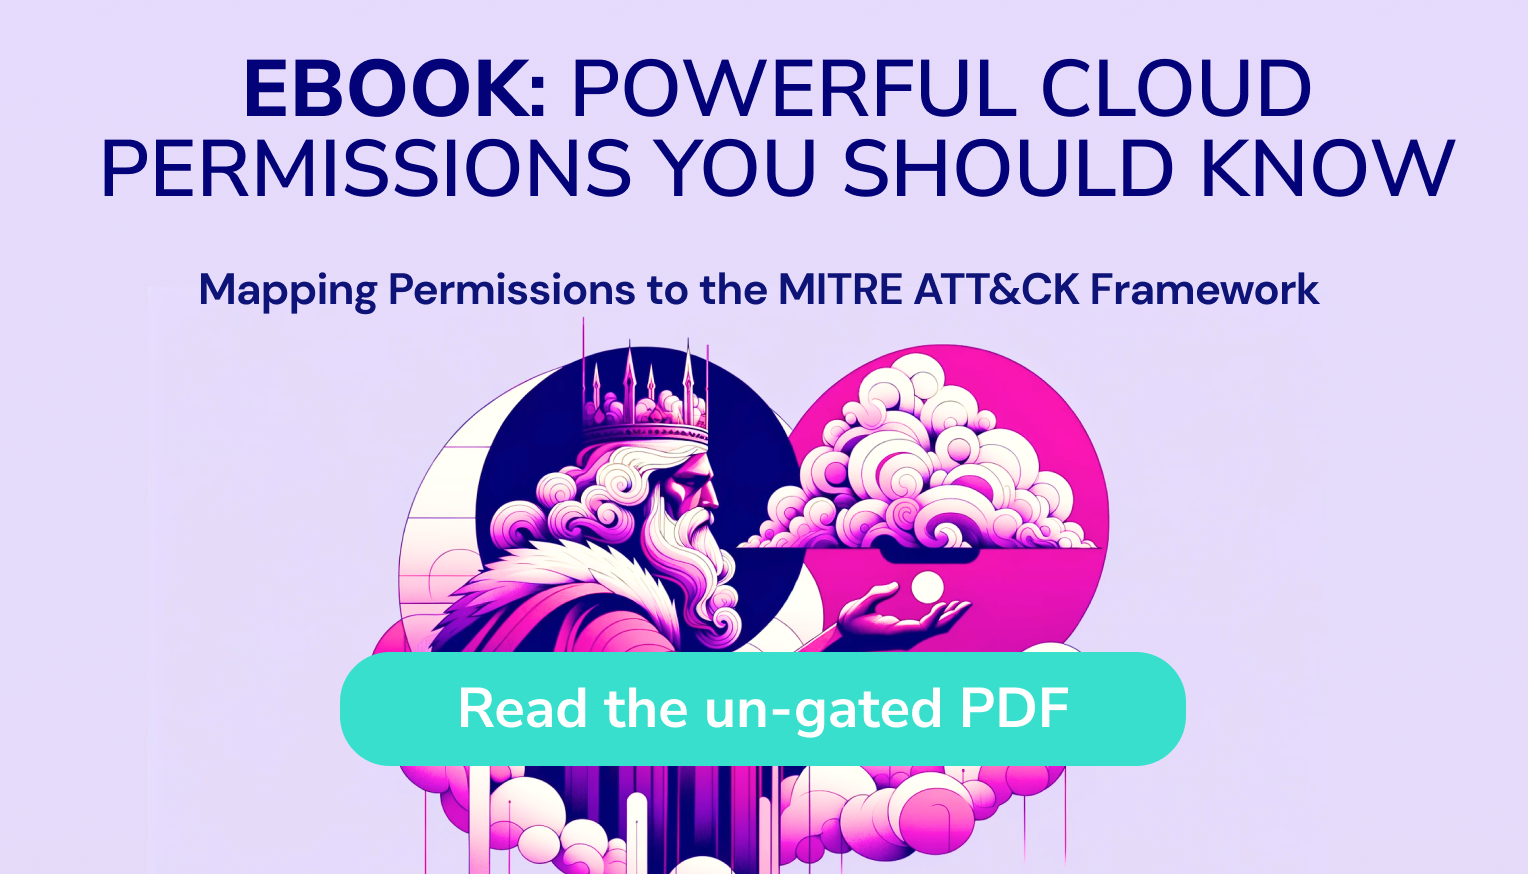 Powerful cloud permissions you should know